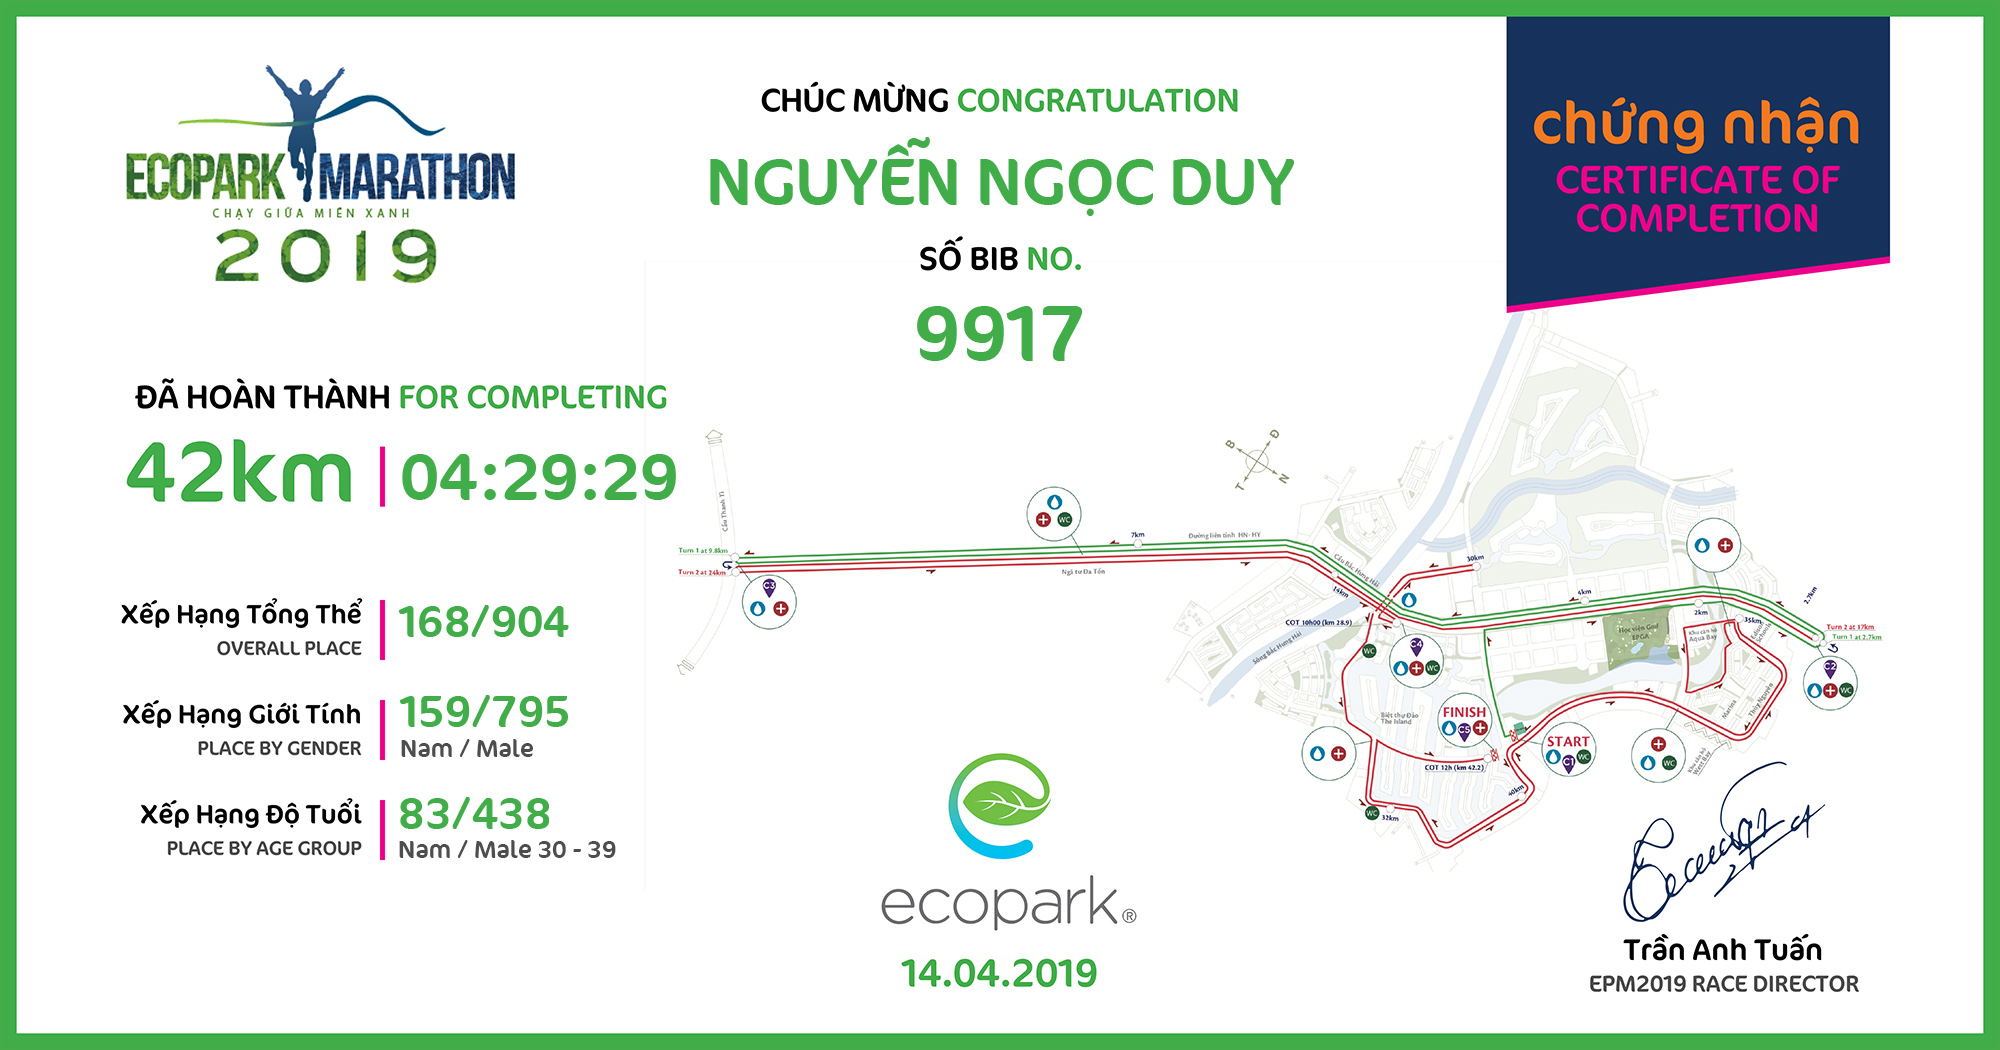 9917 - Nguyễn Ngọc Duy